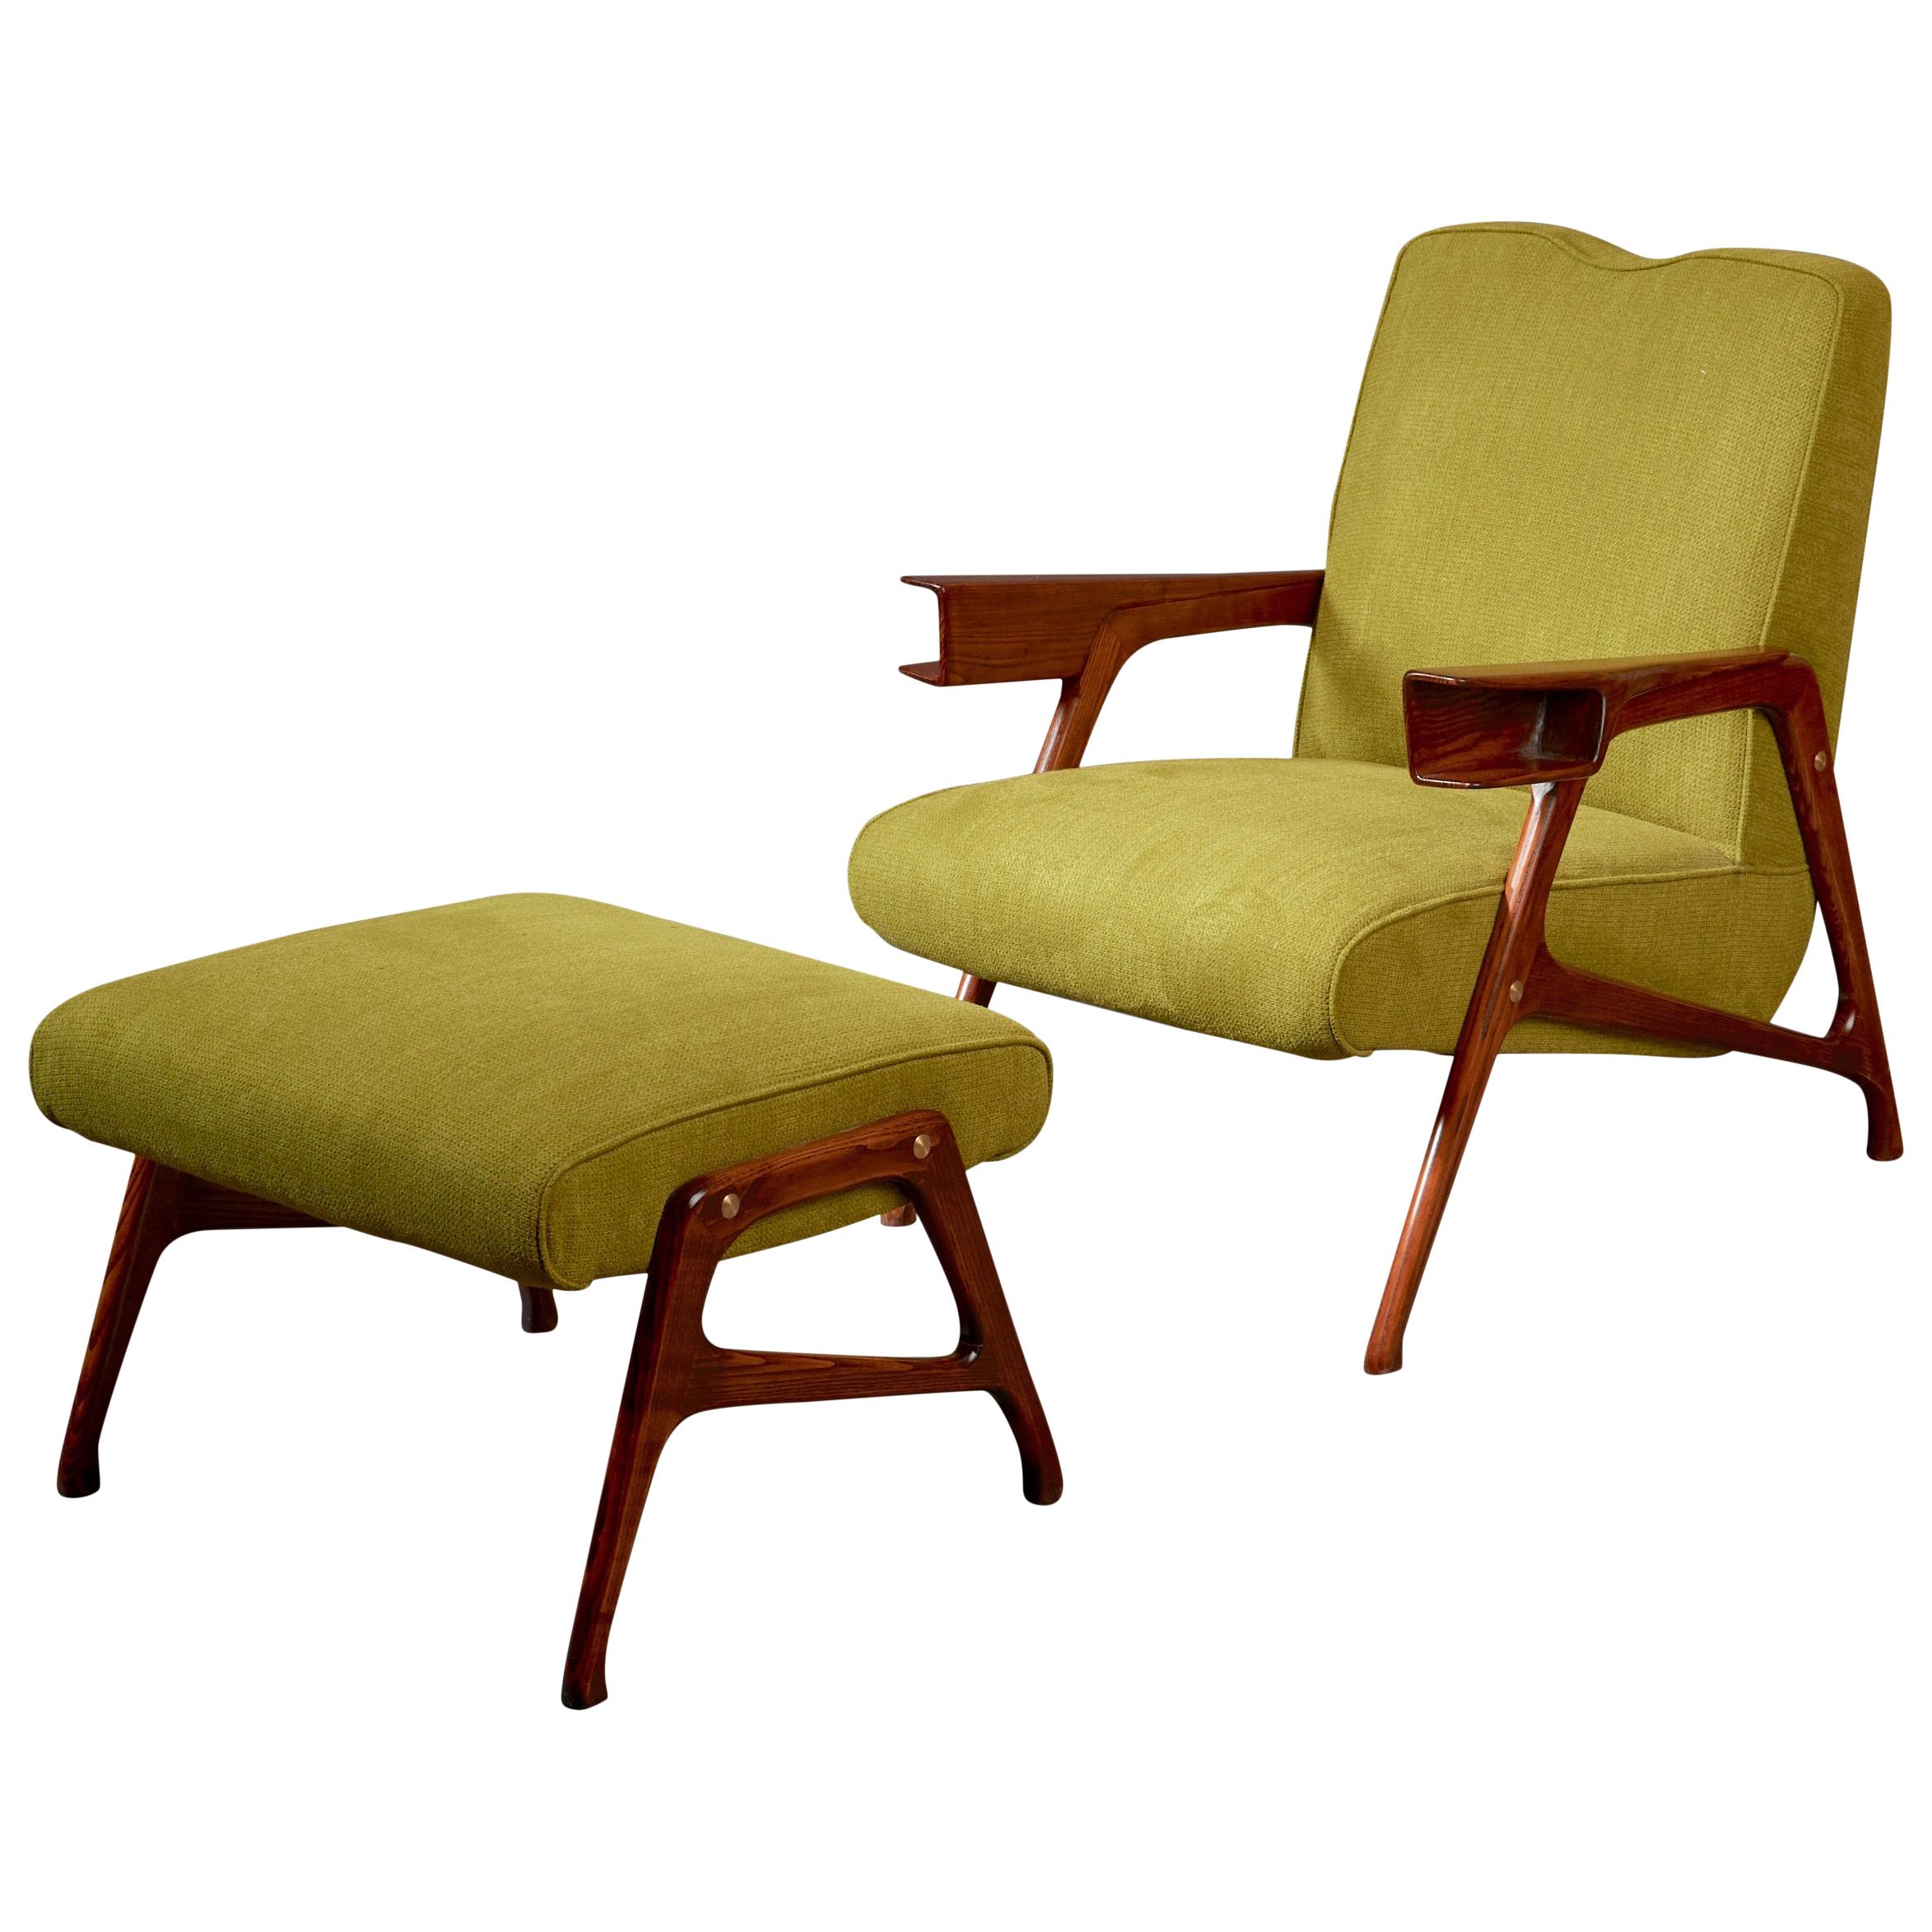 Augusto Romano, Architectural Mahogany Armchair and Ottoman, Italy, 1950s For Sale